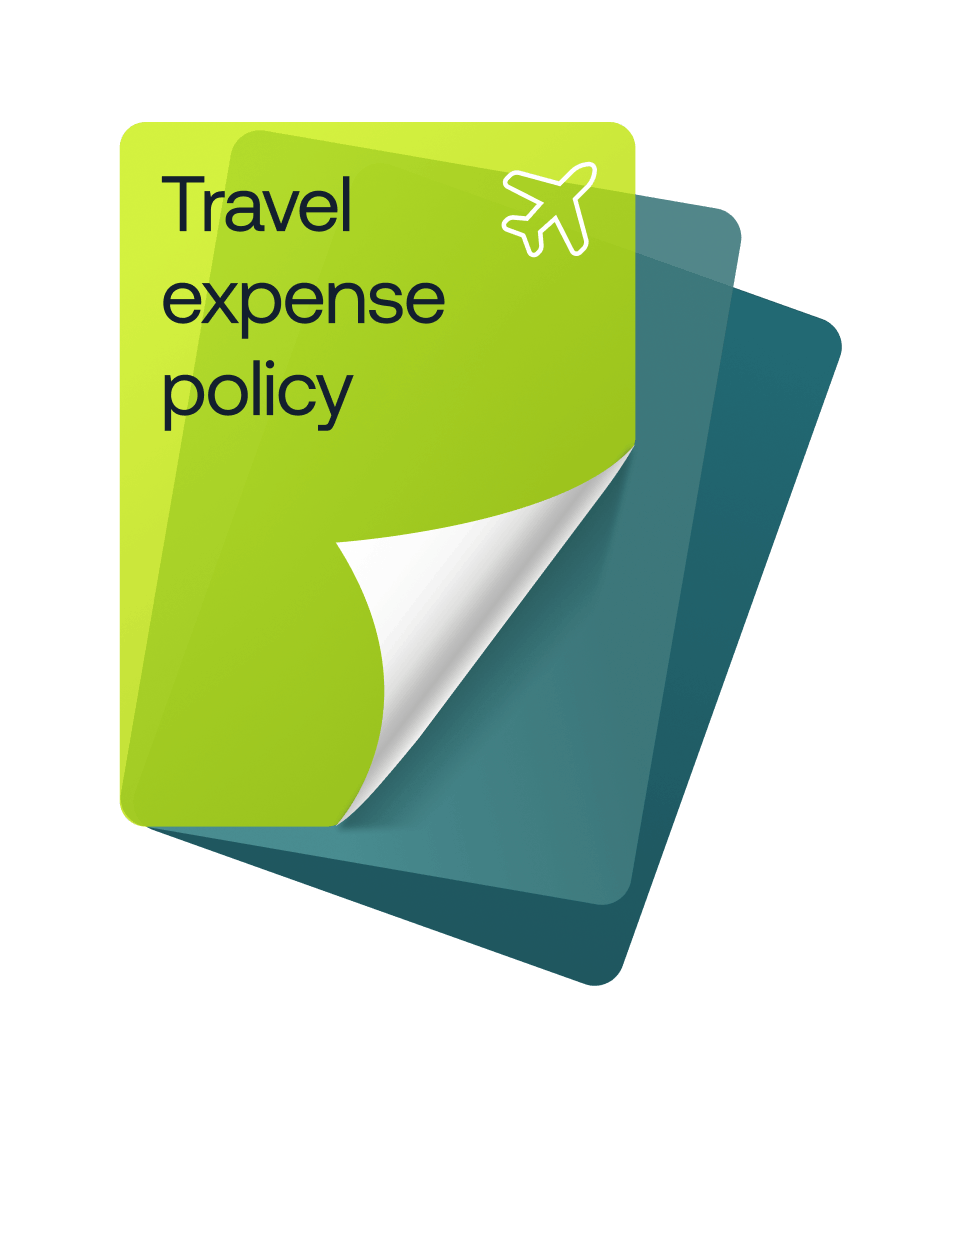 employee crew book travel & expense policy (servicenow.com)